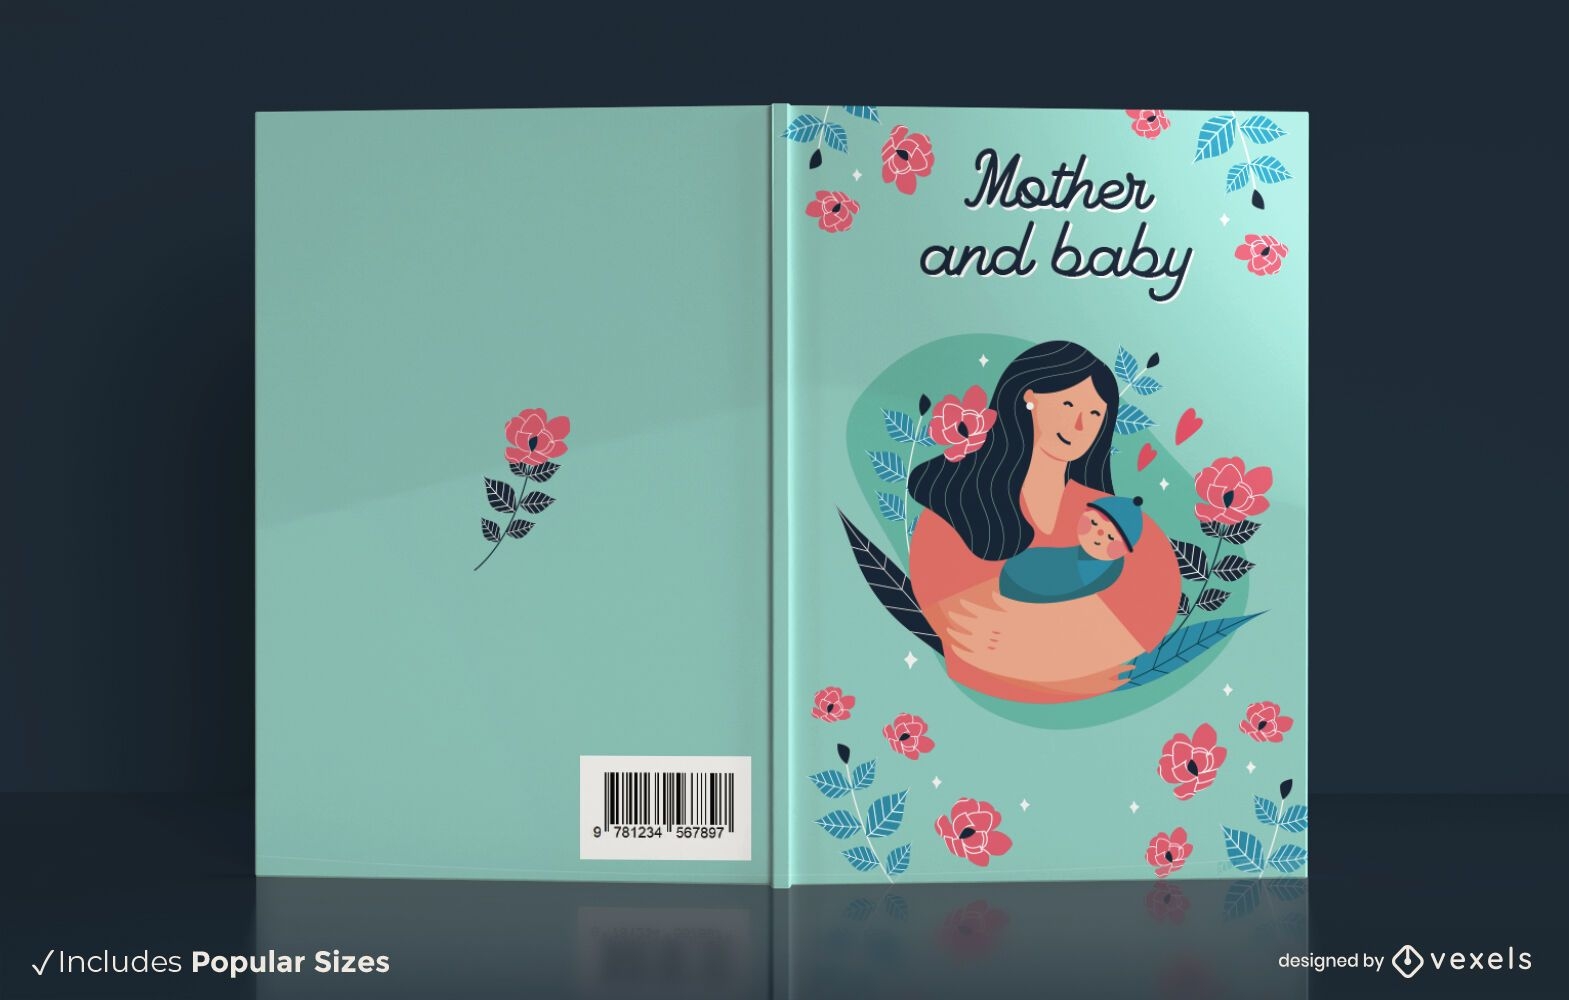 Mother and baby book cover design